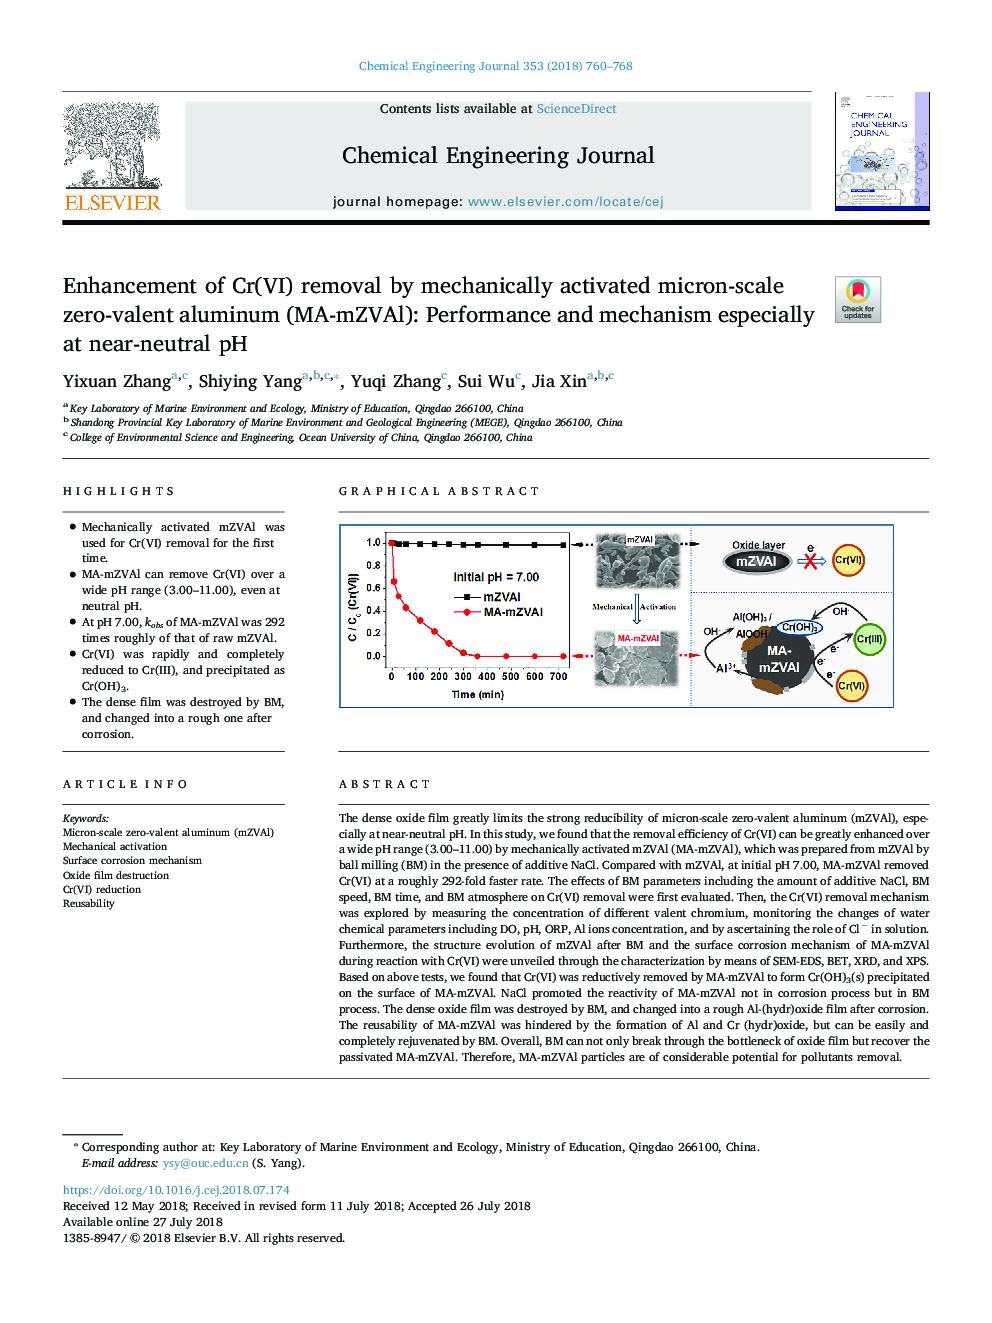 Enhancement of Cr(VI) removal by mechanically activated micron-scale zero-valent aluminum (MA-mZVAl): Performance and mechanism especially at near-neutral pH